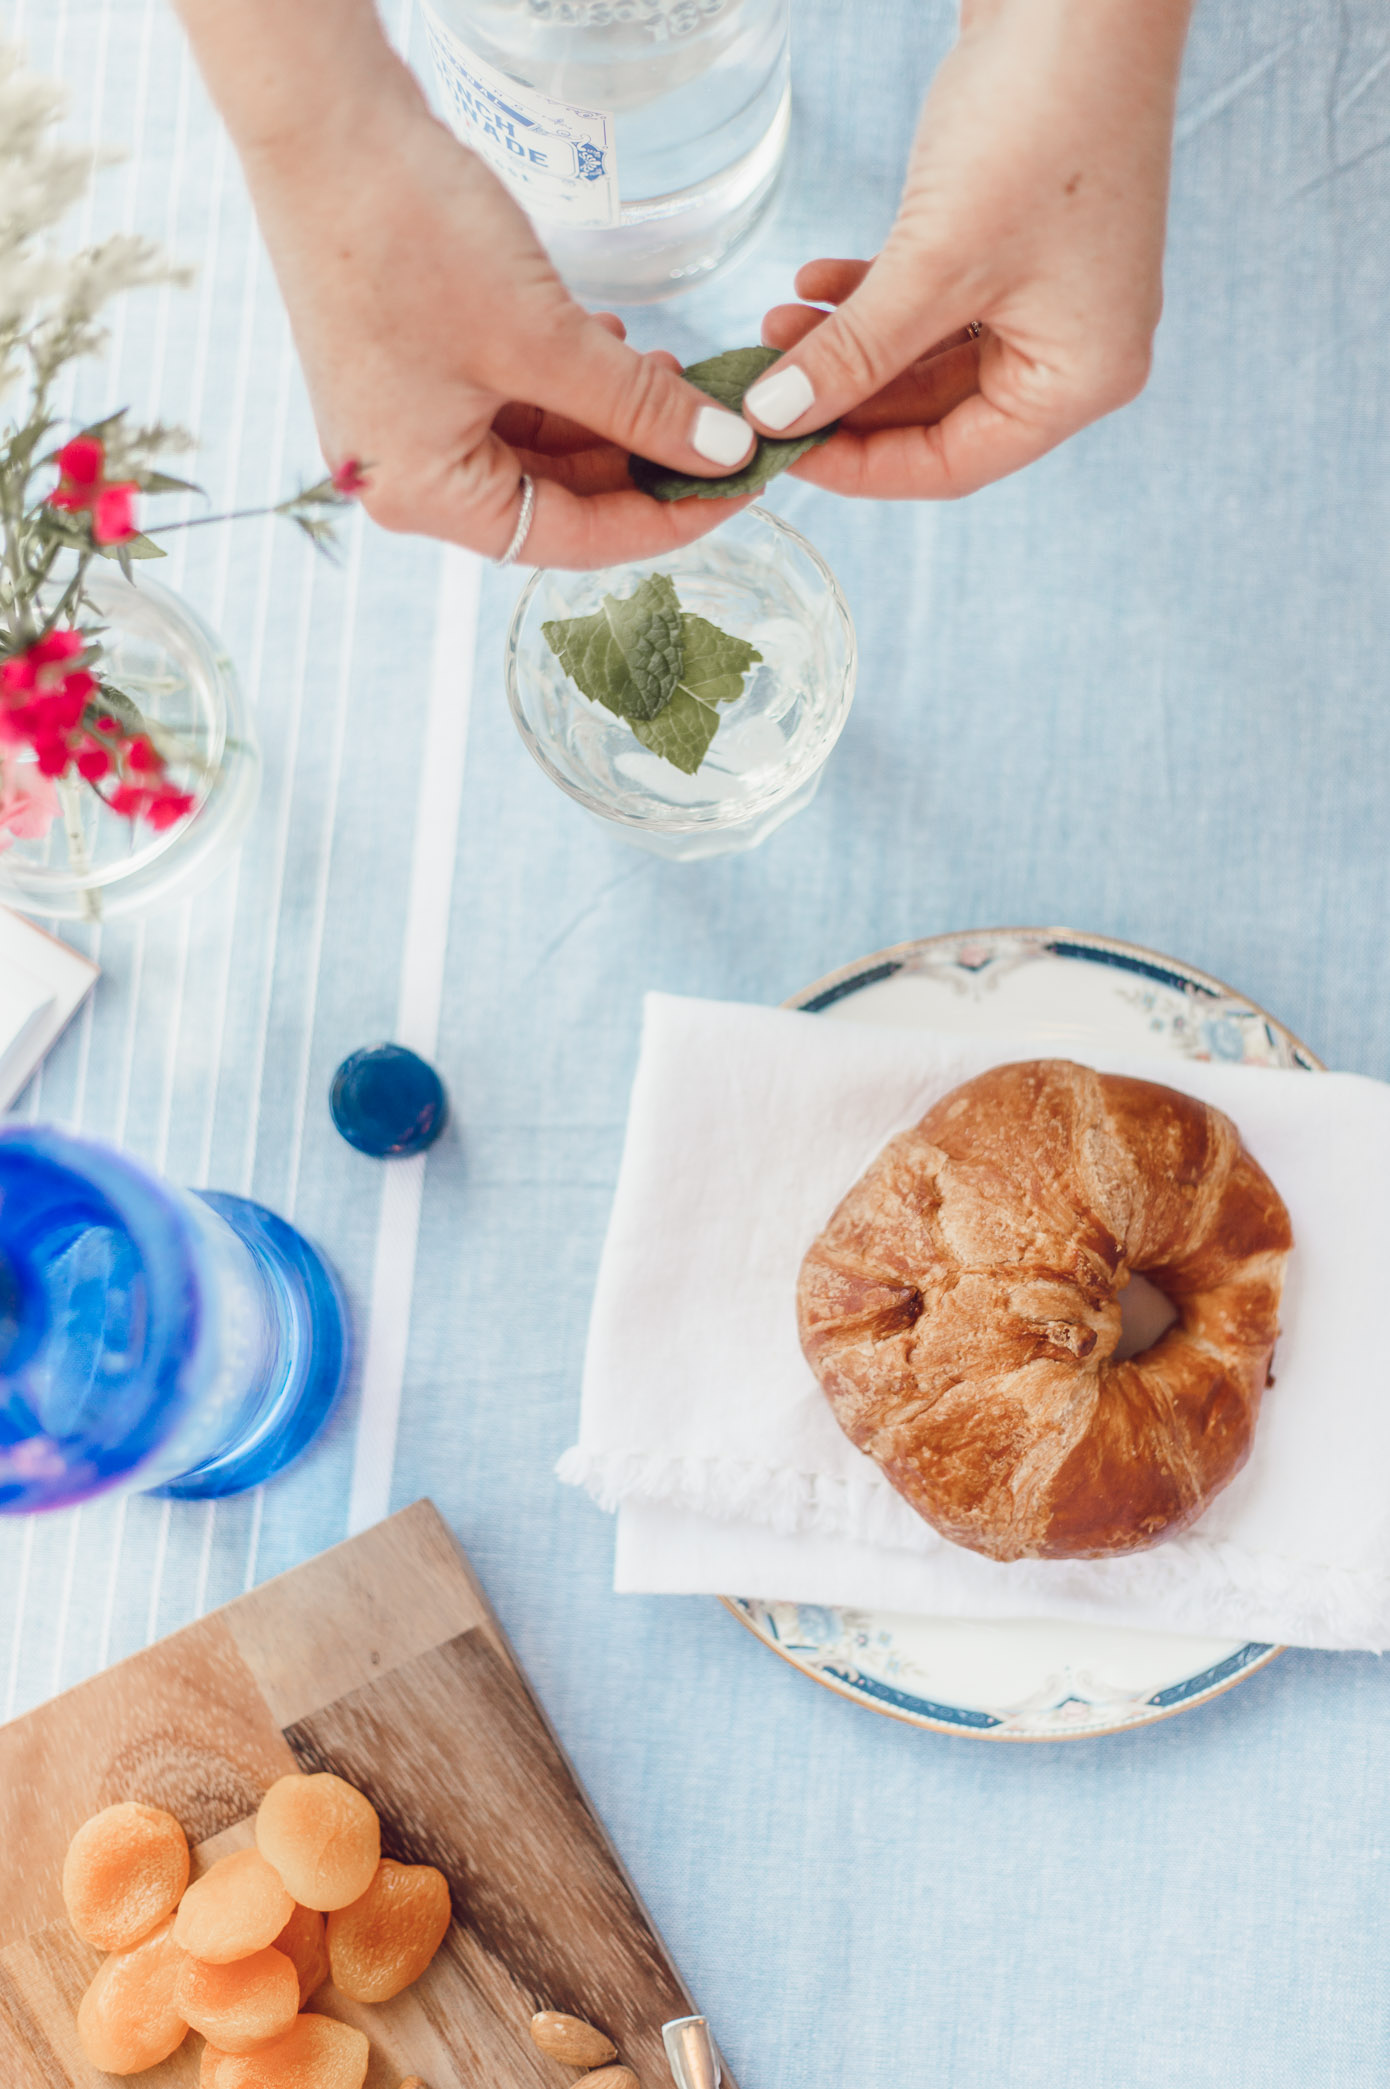 How to Host a French Inspired Picnic by popular Charlotte style blogger Louella Reese